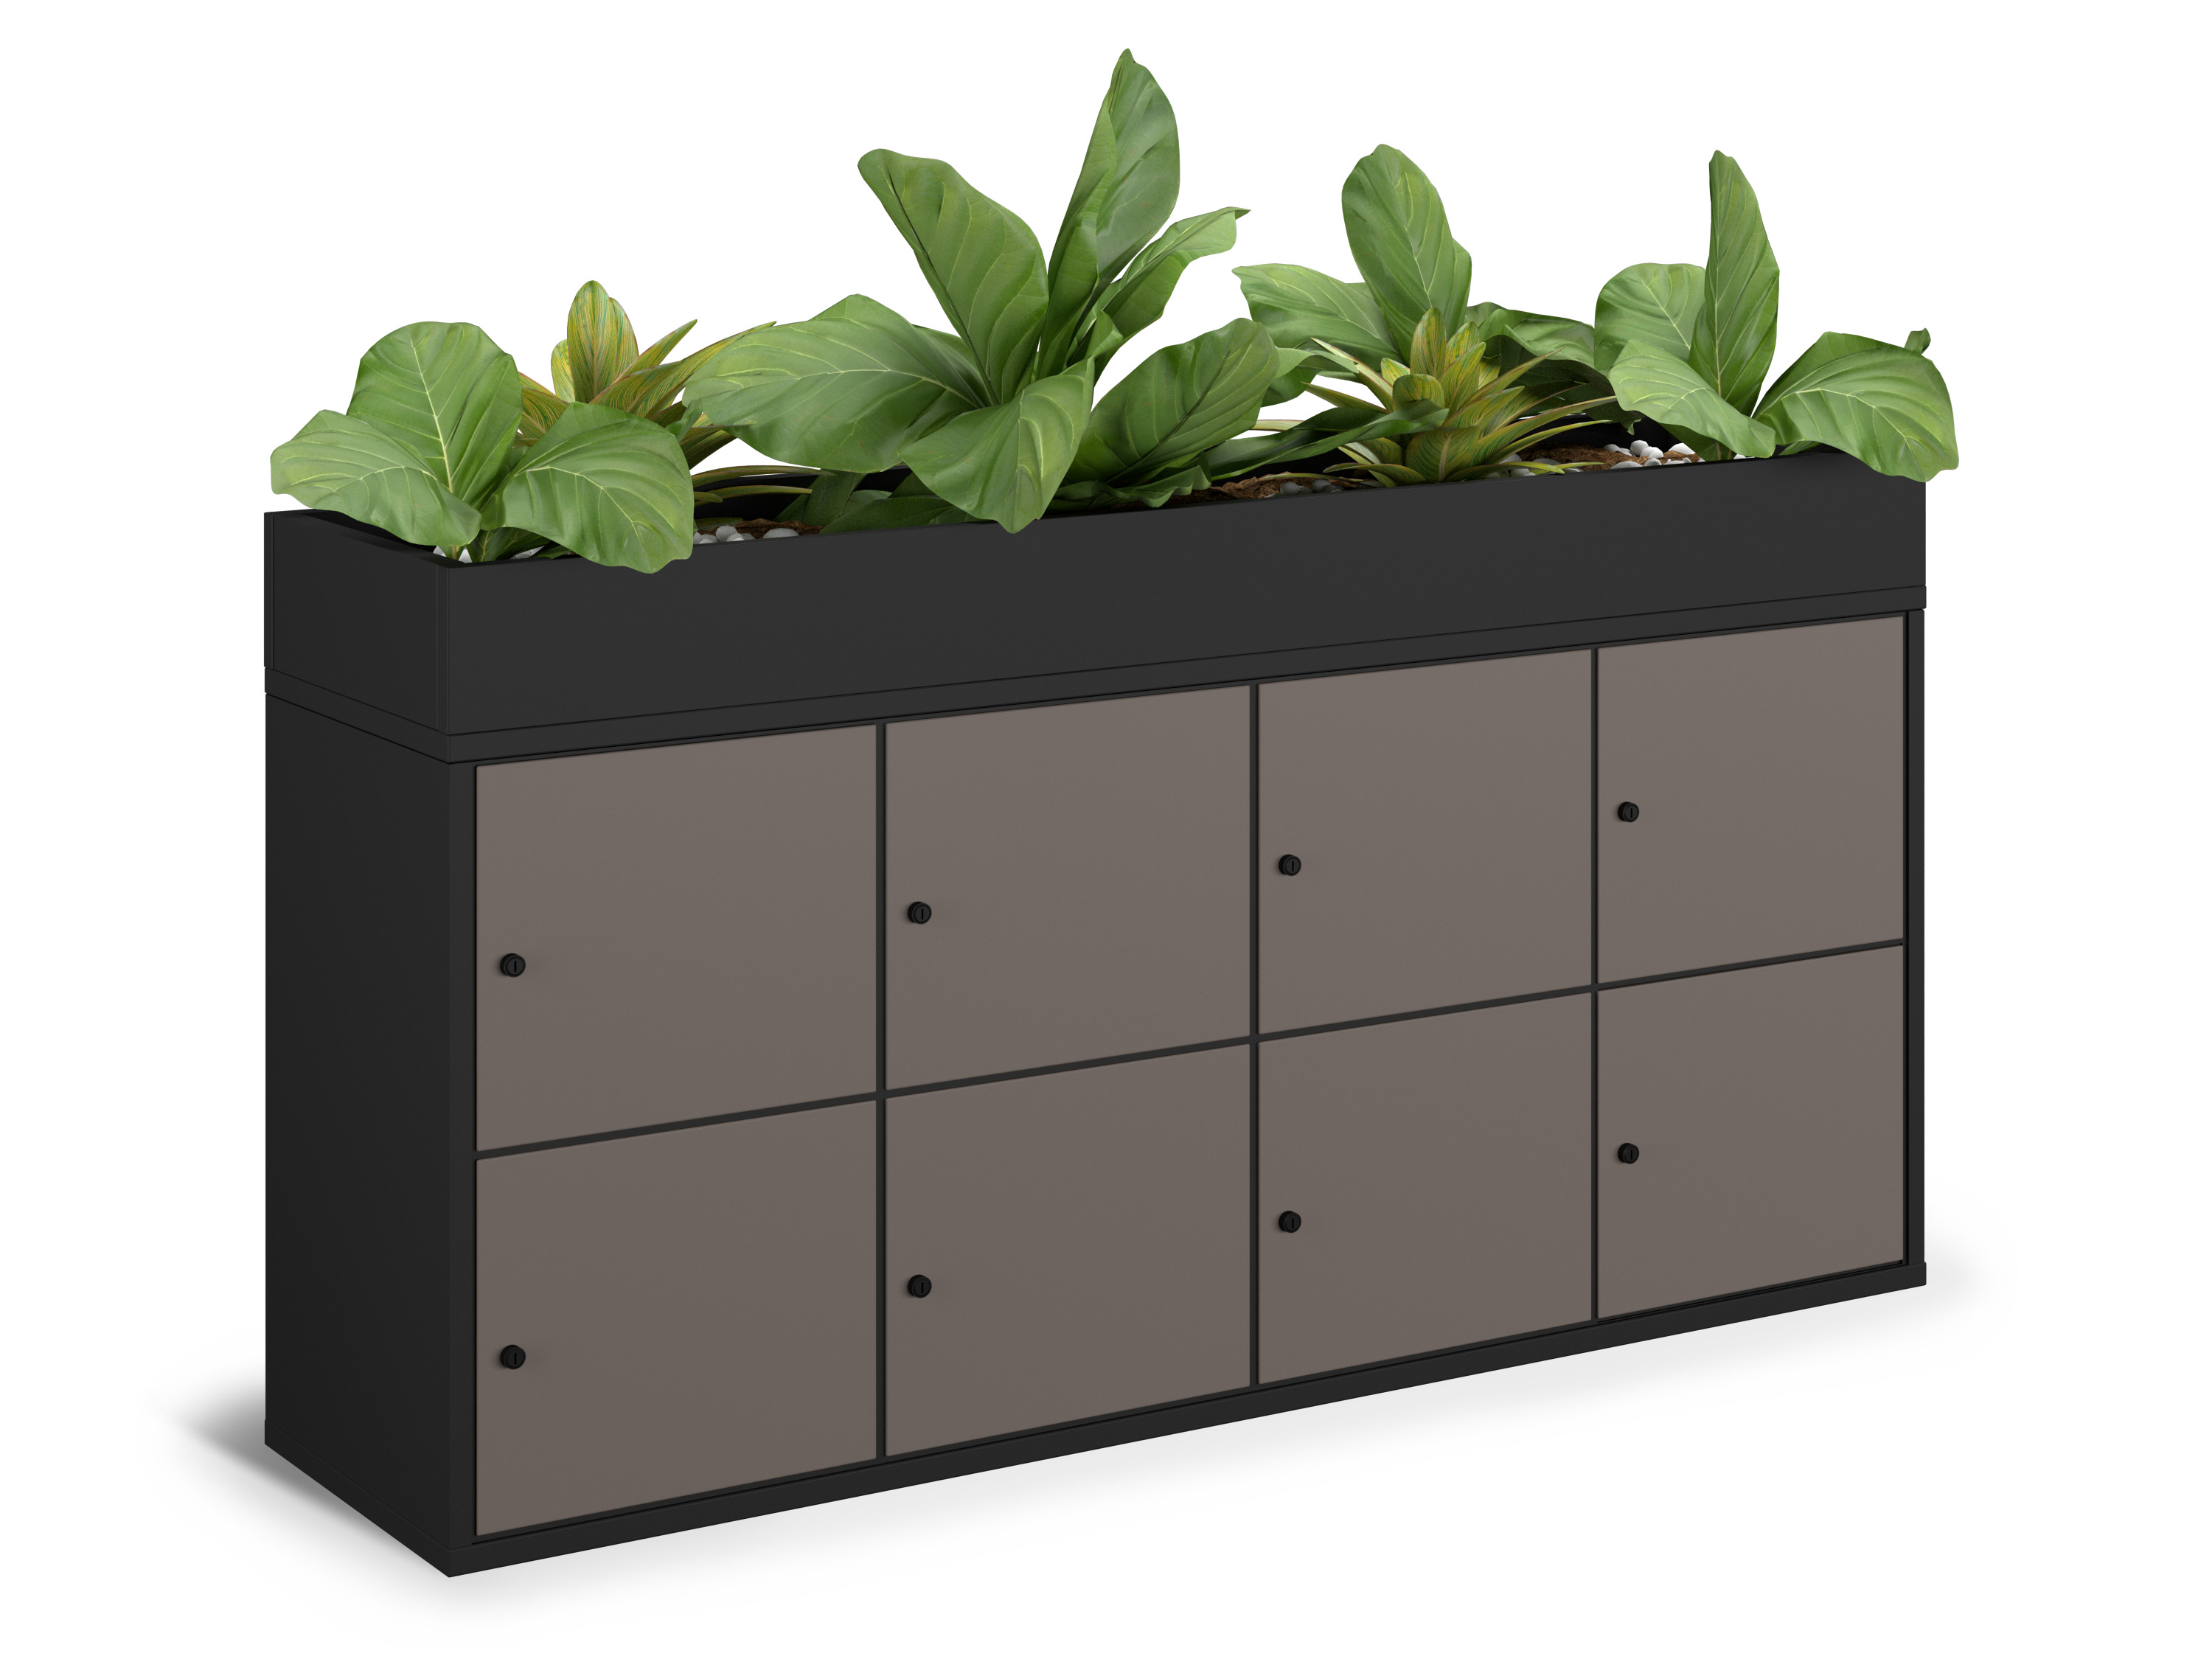 WS - End of Desk - Lockers with planter (Anthracite, Stone grey)